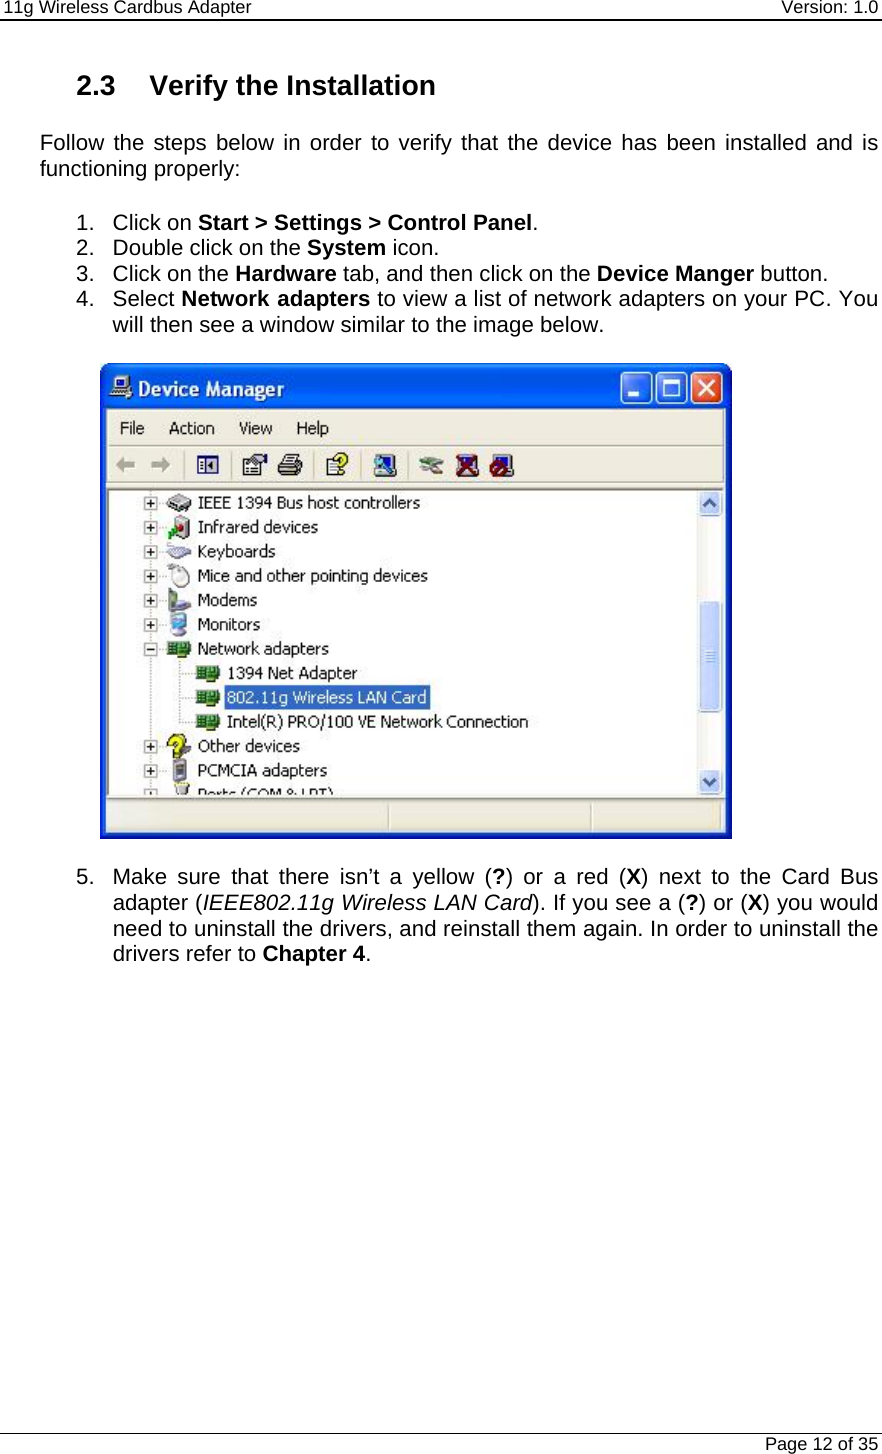 11g Wireless Cardbus Adapter    Version: 1.0   Page 12 of 35 2.3  Verify the Installation   Follow the steps below in order to verify that the device has been installed and is functioning properly:  1. Click on Start &gt; Settings &gt; Control Panel. 2.  Double click on the System icon. 3. Click on the Hardware tab, and then click on the Device Manger button.  4. Select Network adapters to view a list of network adapters on your PC. You will then see a window similar to the image below.    5.  Make sure that there isn’t a yellow (?) or a red (X) next to the Card Bus adapter (IEEE802.11g Wireless LAN Card). If you see a (?) or (X) you would need to uninstall the drivers, and reinstall them again. In order to uninstall the drivers refer to Chapter 4.   